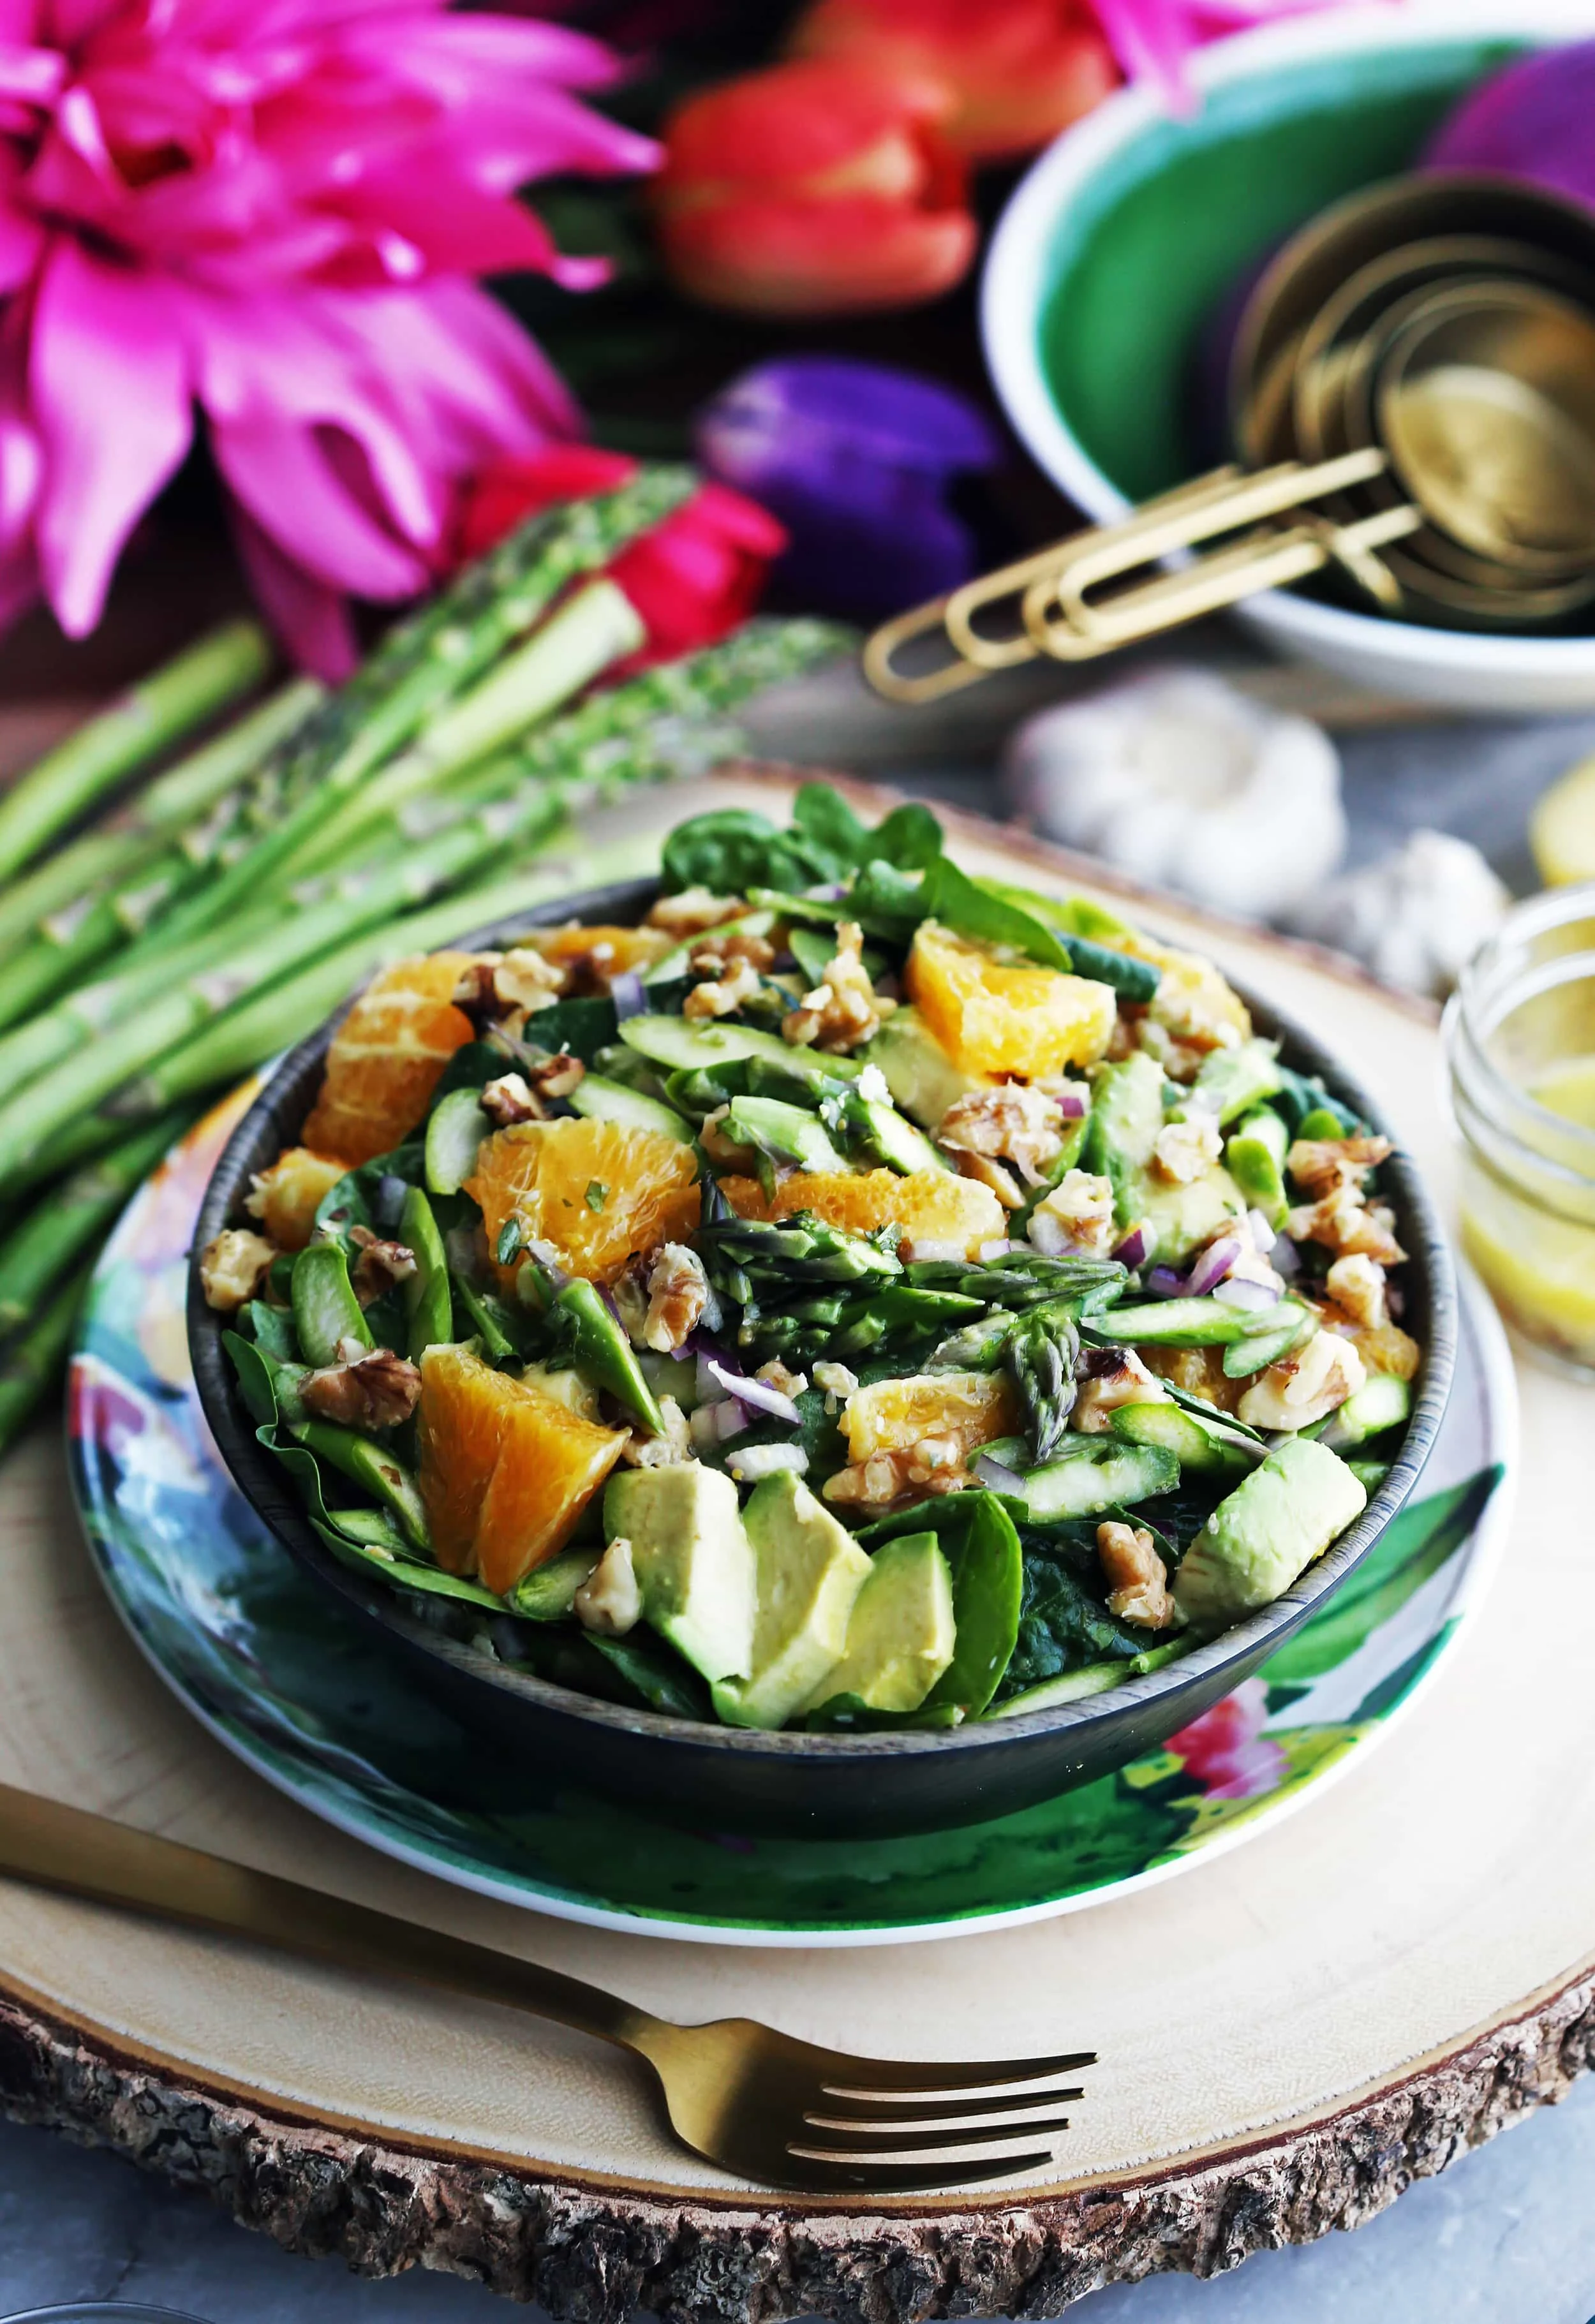 A wooden bowl full of Asparagus Orange Spinach Salad with Basil Lemon Vinaigrette along with a fork beside it.